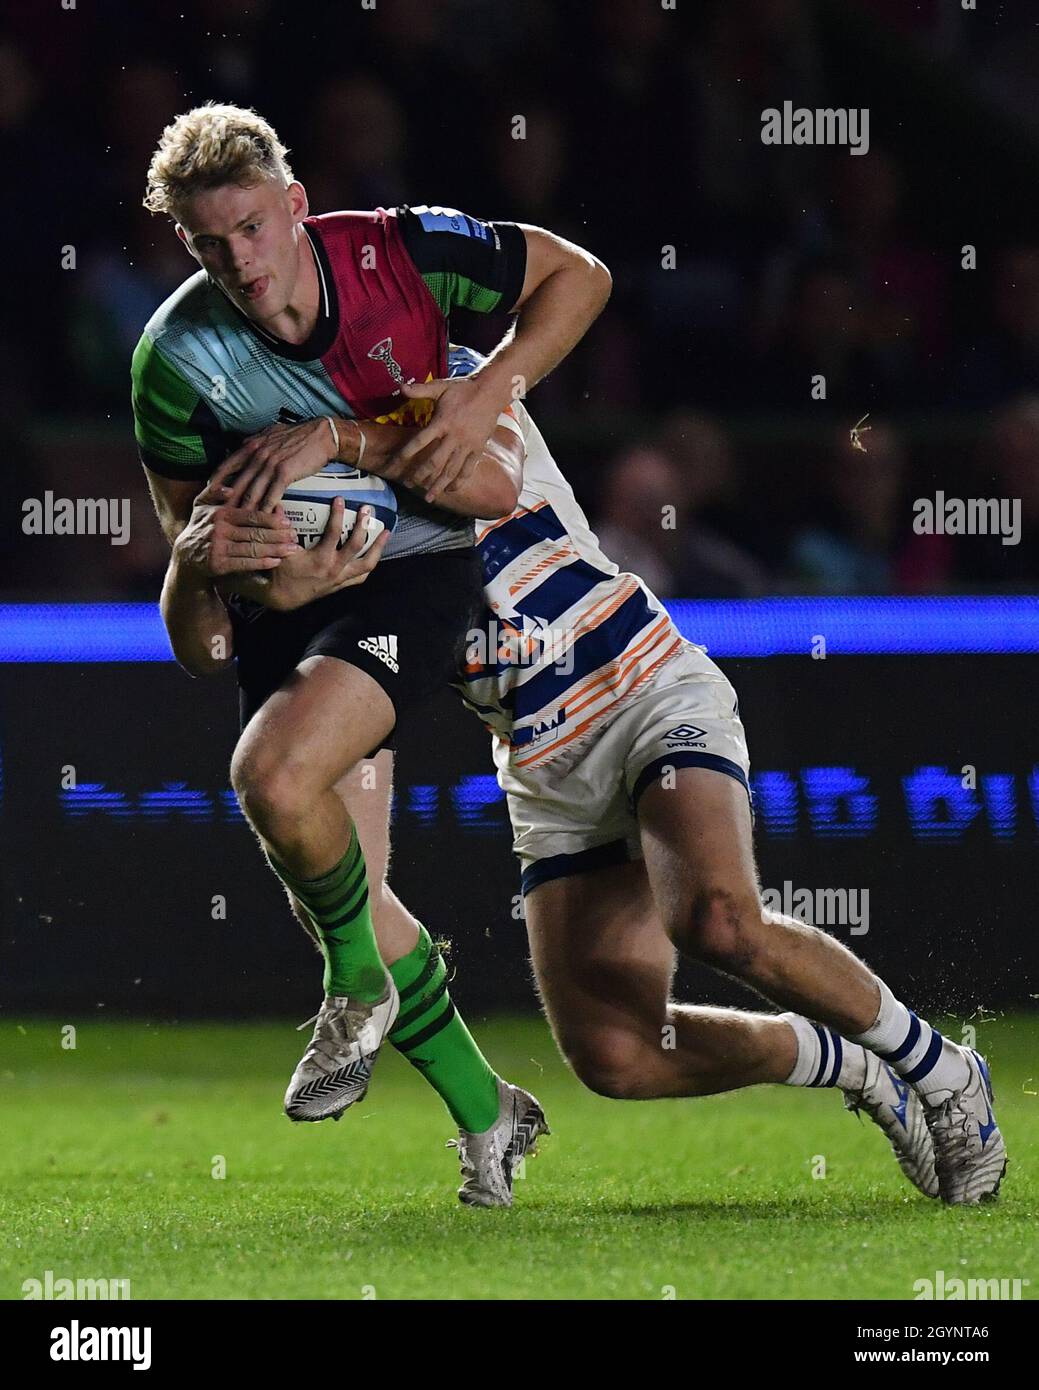 Twickenham Stoop Stadium, UK, UK. 8th October, 2021. Harlequins' Louis Lynagh in action during the Gallagher English Premiership game between Harlequins and Bristol Bears: Credit: Ashley Western/Alamy Live News Stock Photo